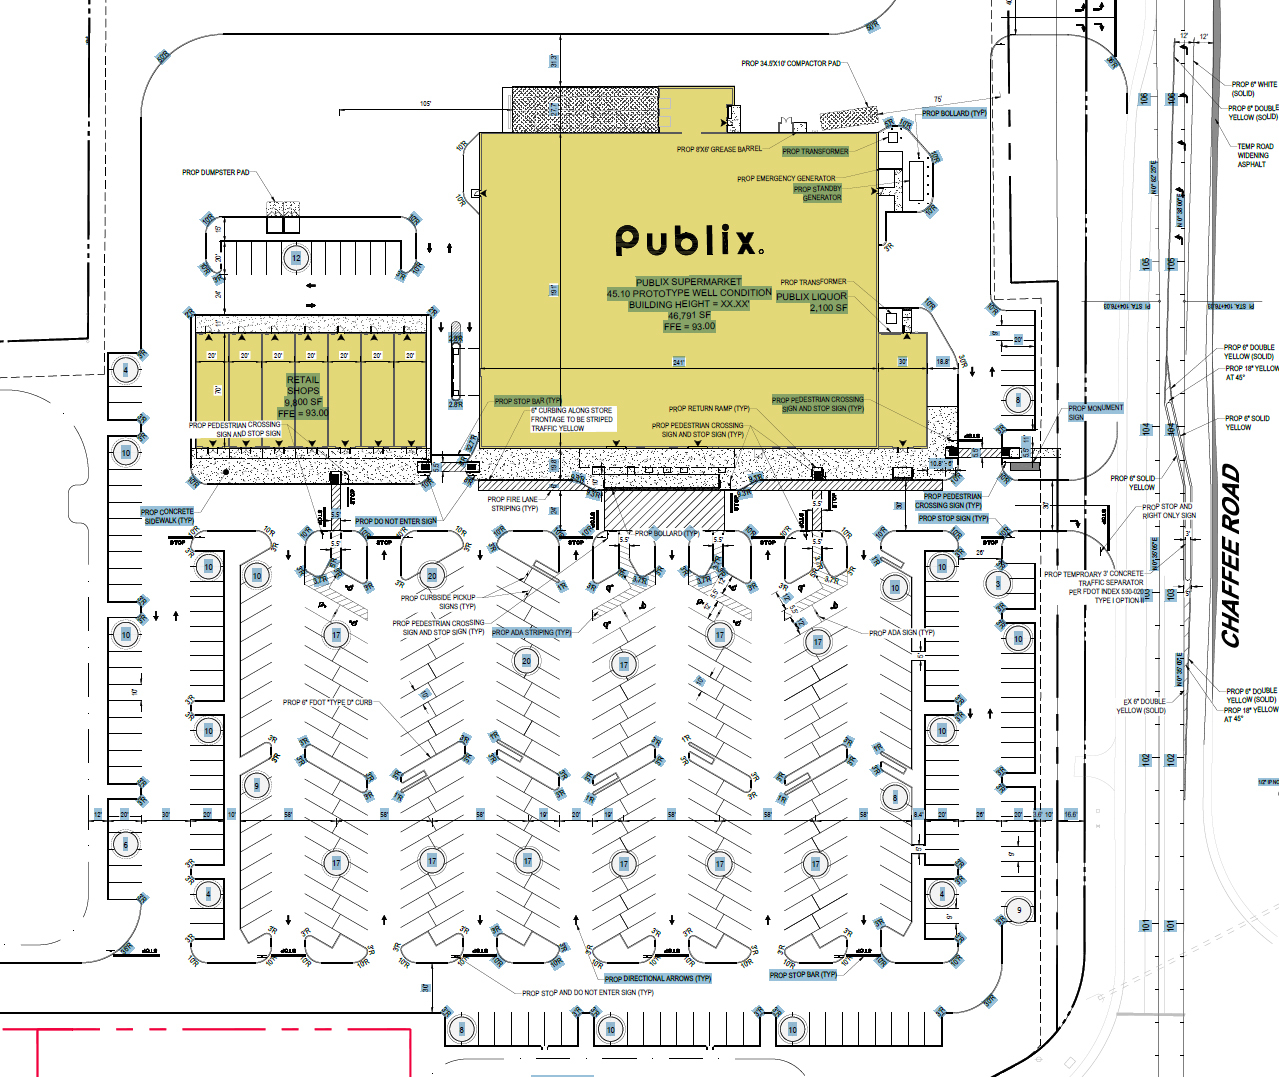 The St. Johns River Water Management District is reviewing an application for the 19.35-acre project designed for a 46,791-square-foot Publix and another 9,800-square-foot building of retail shops.